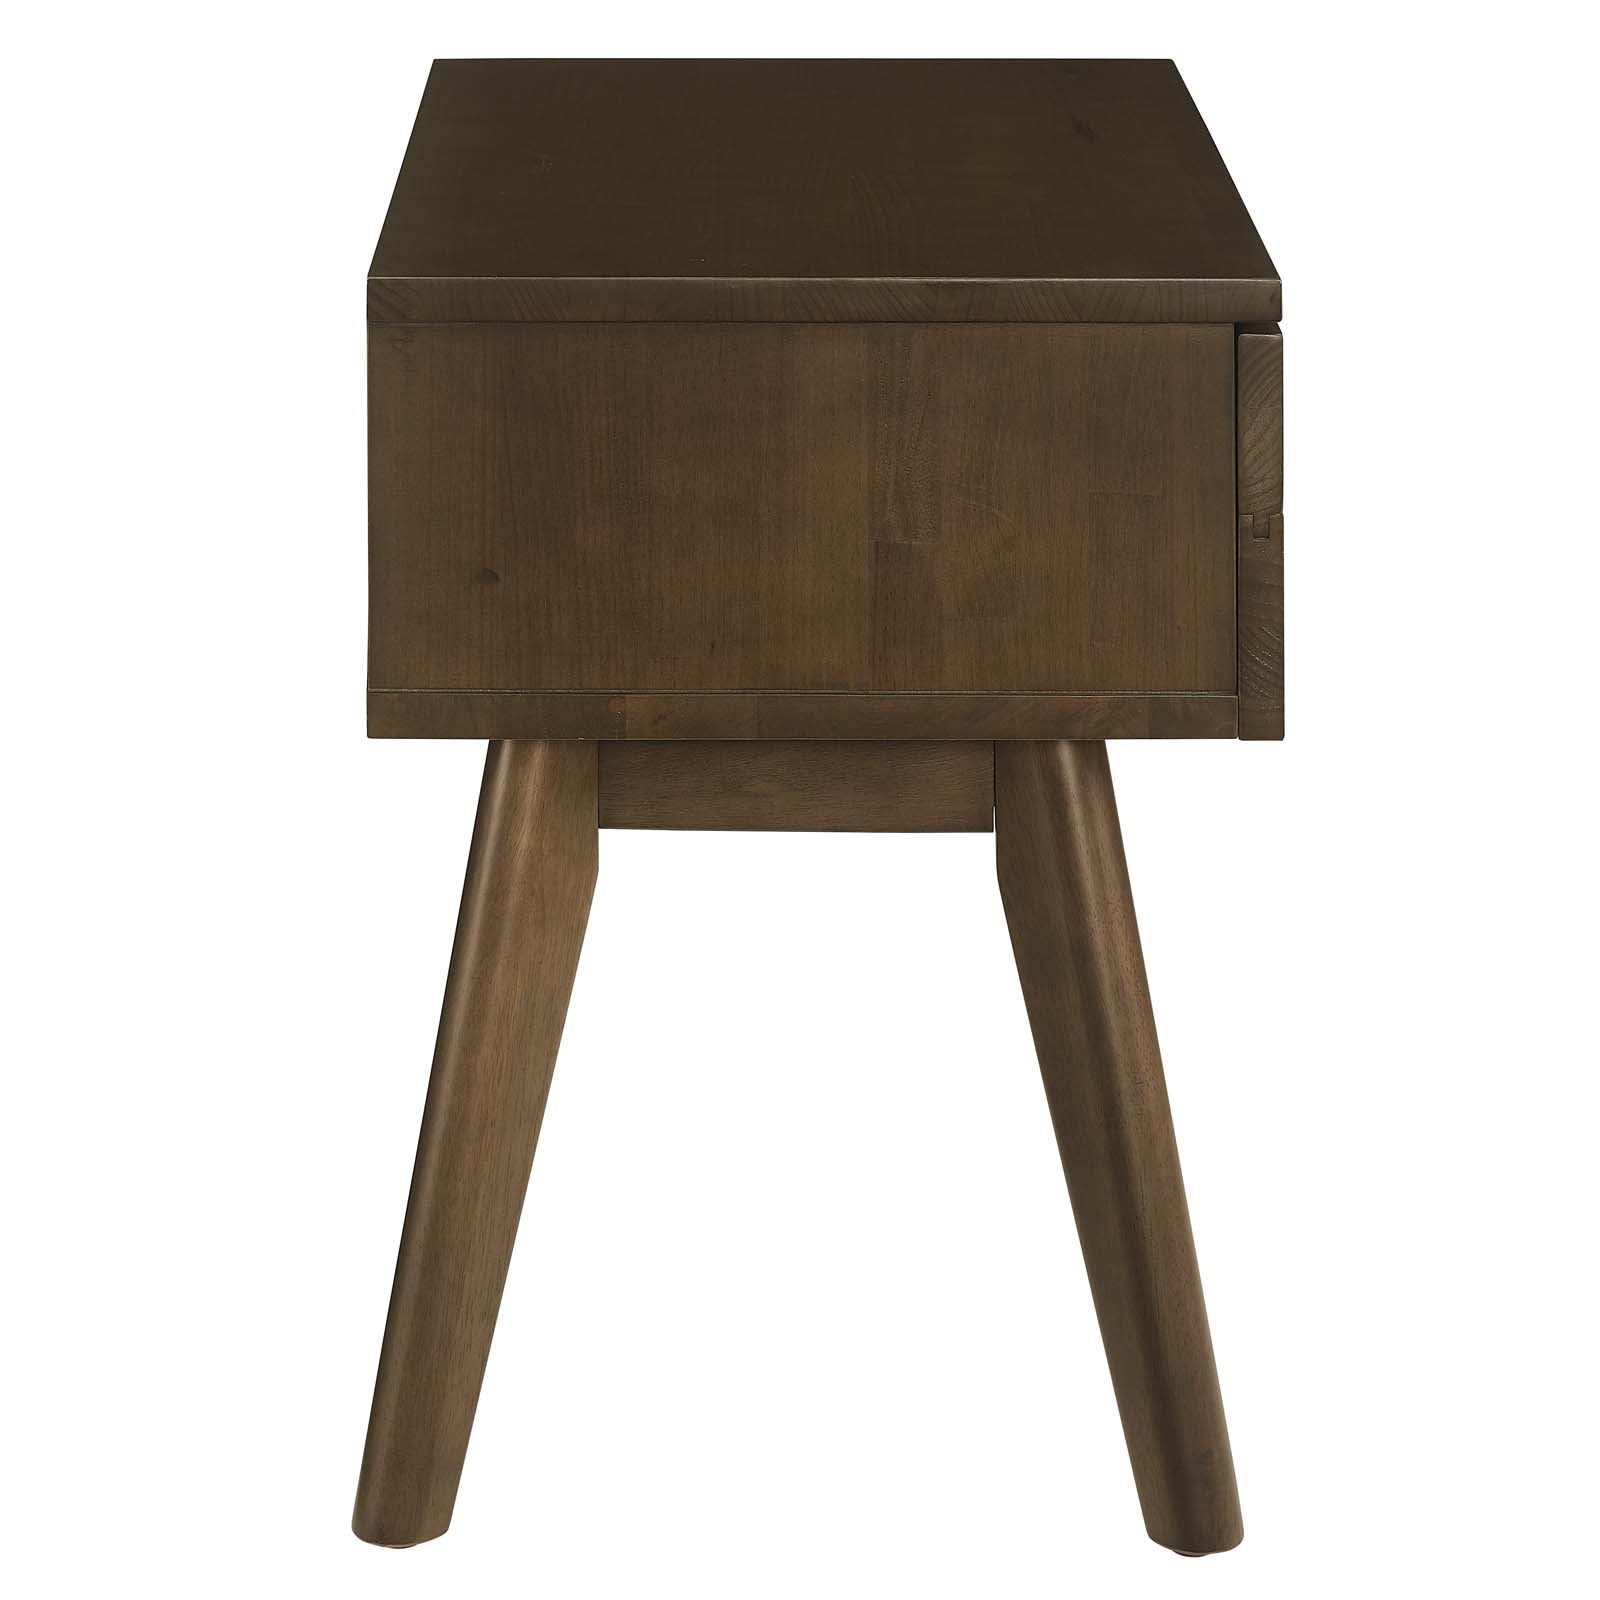 Modway Nightstands & Side Tables - Everly Wood Nightstand Walnut